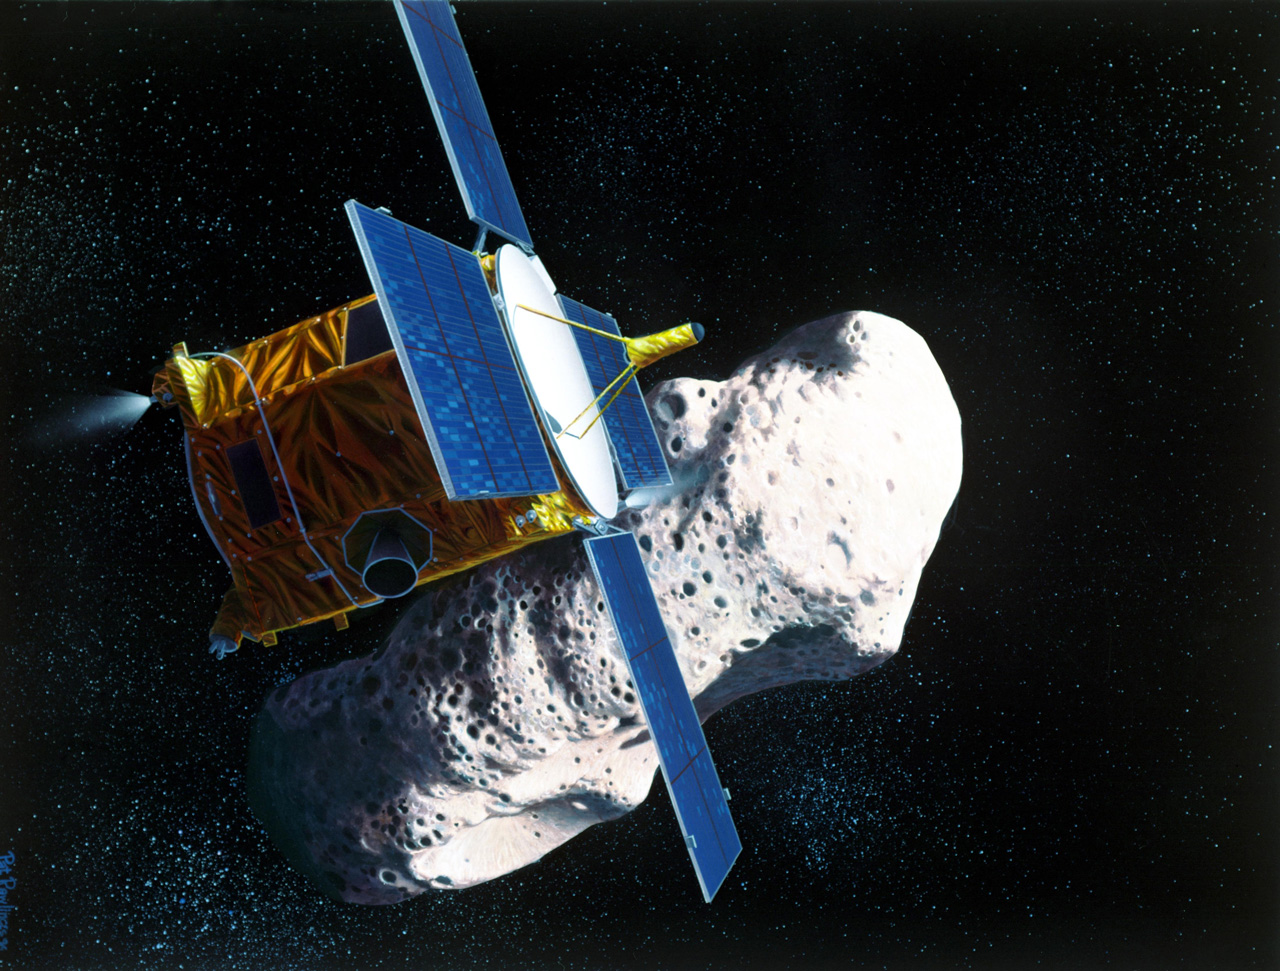 Spacecraft with asteroid in background.